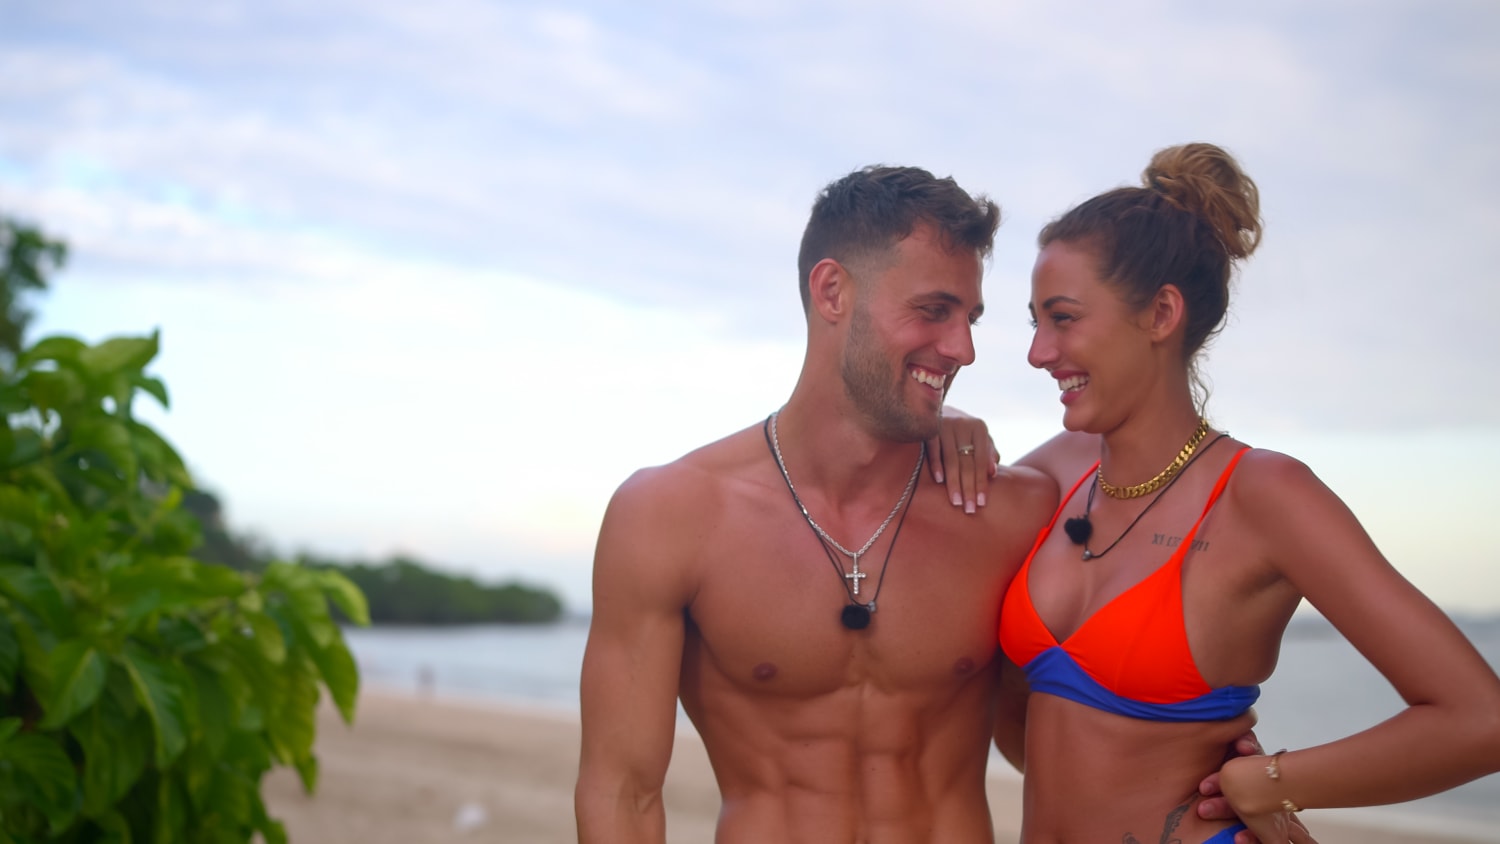 What Happened To Chloe Veitch After Perfect Match Season 1